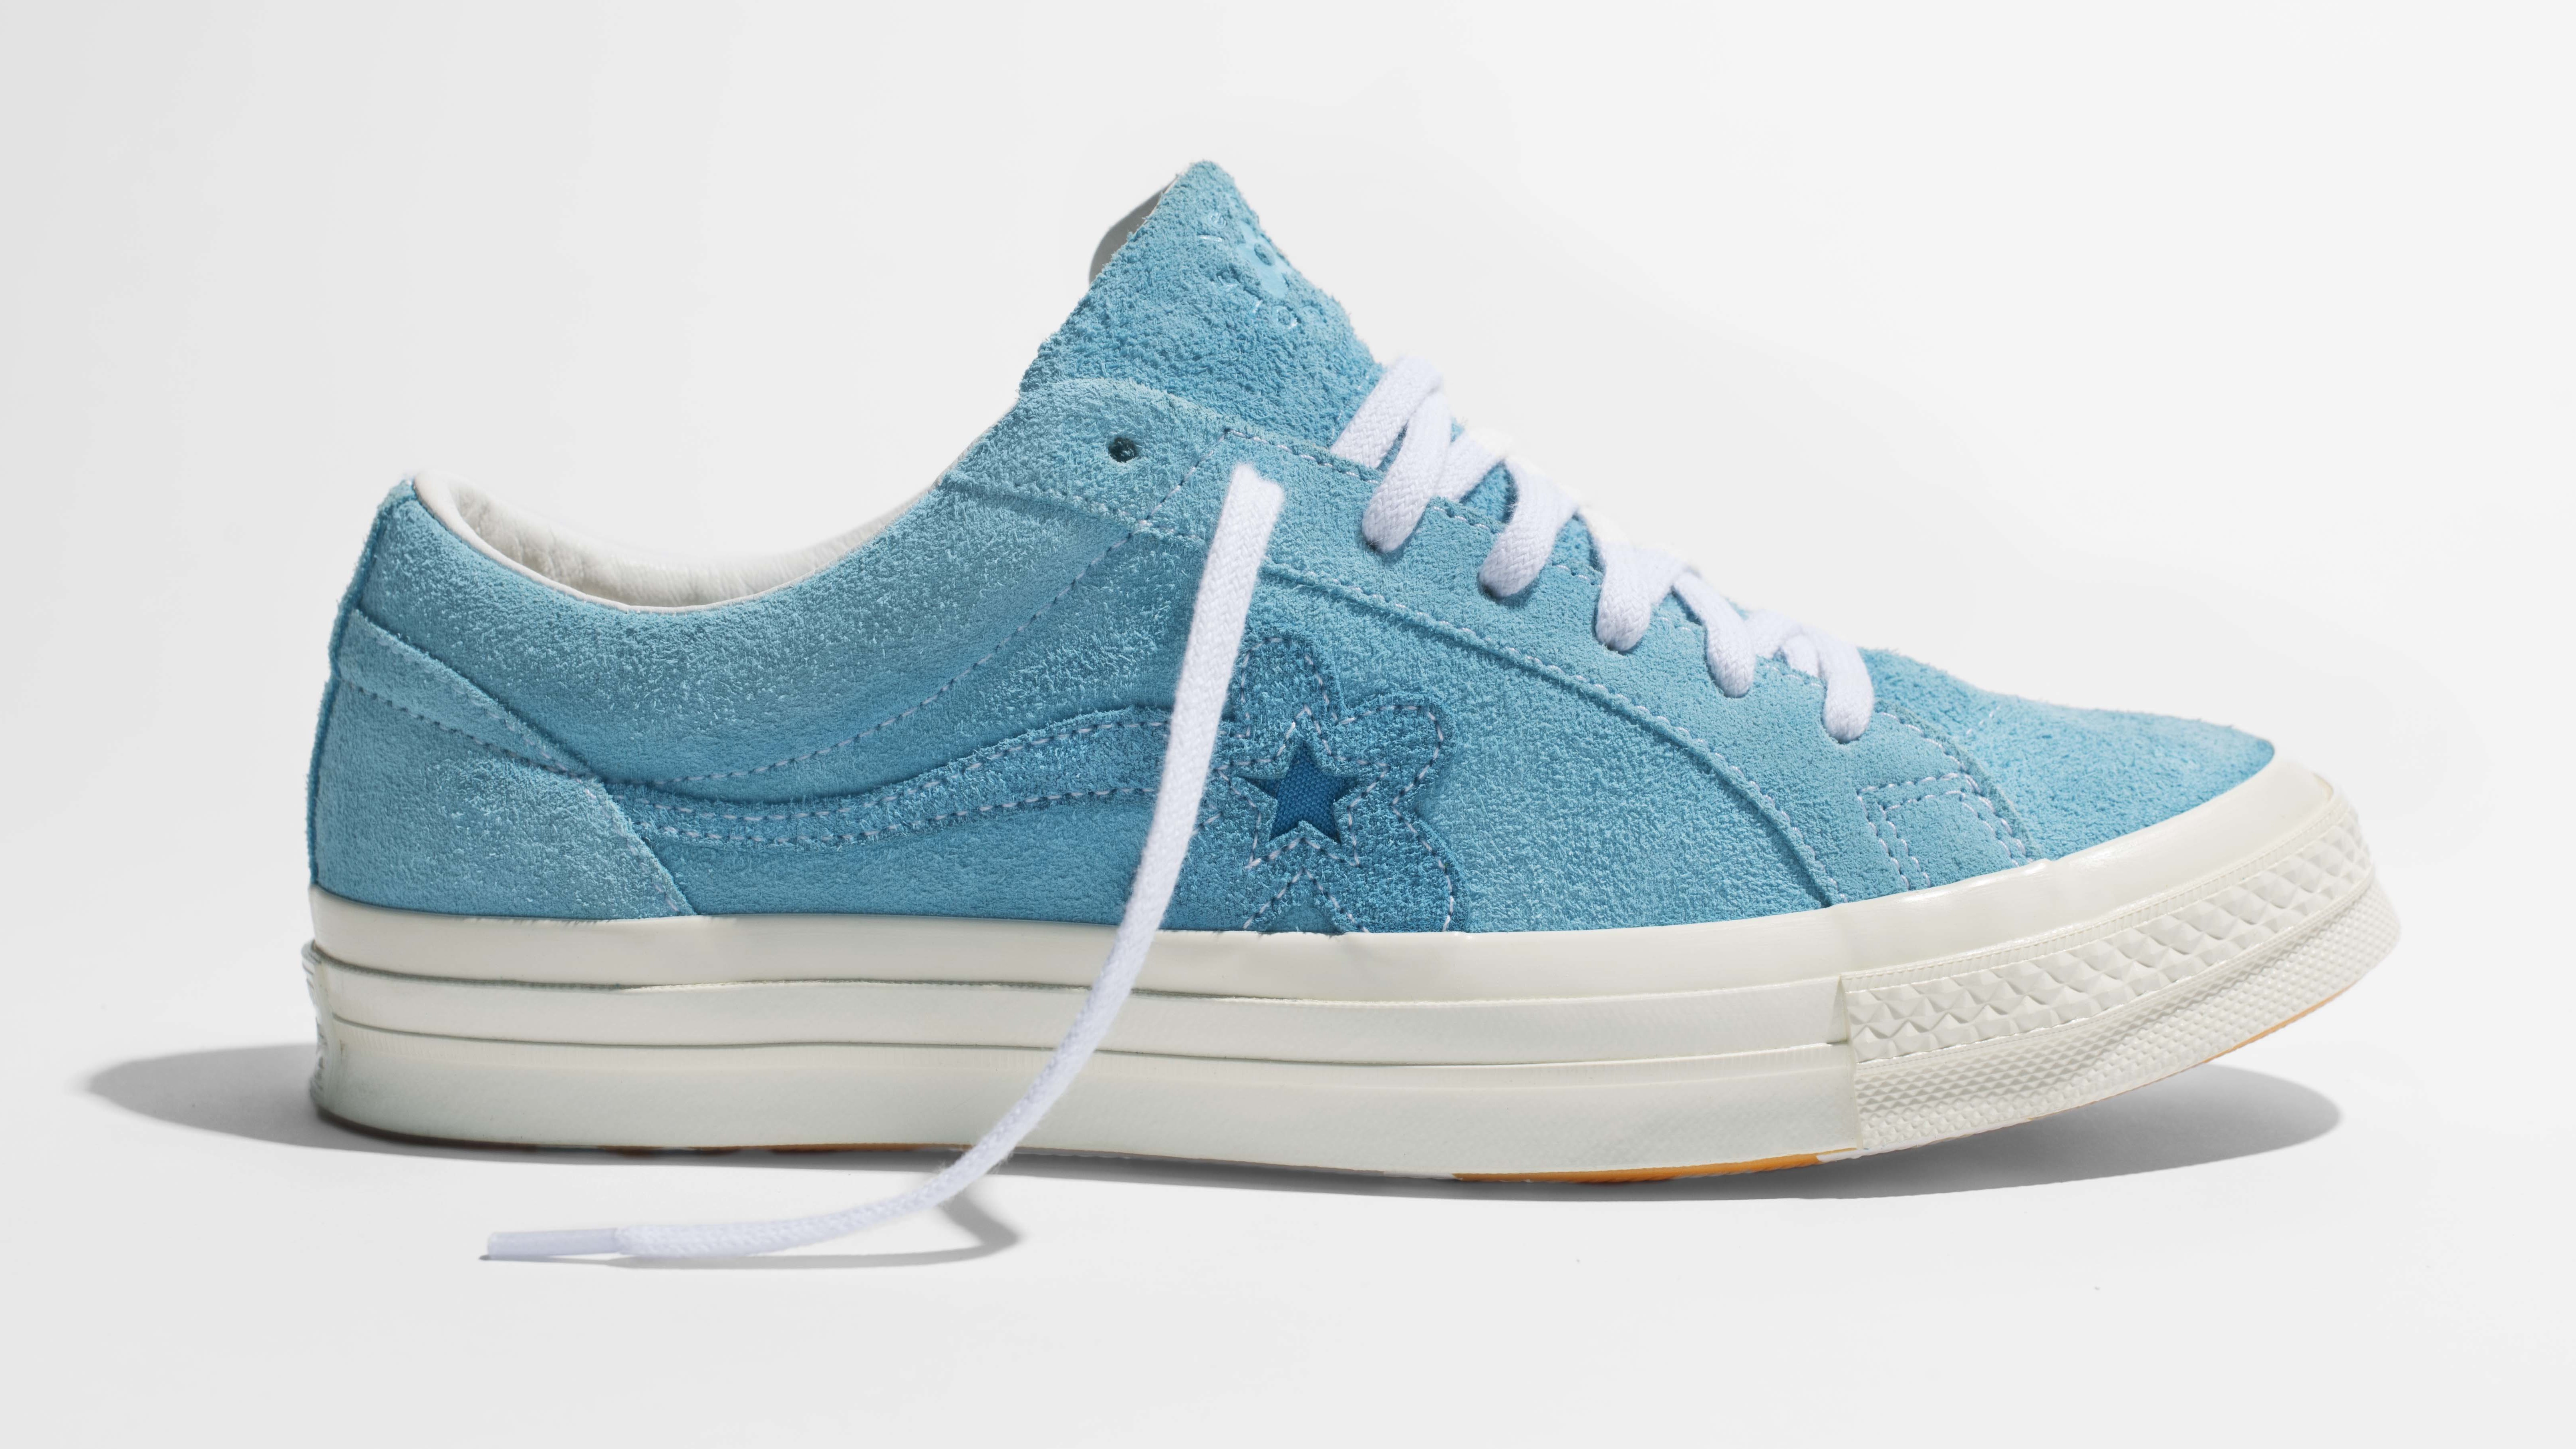 Tyler, Creator's One Star Dropping in Three New Colorways | Complex